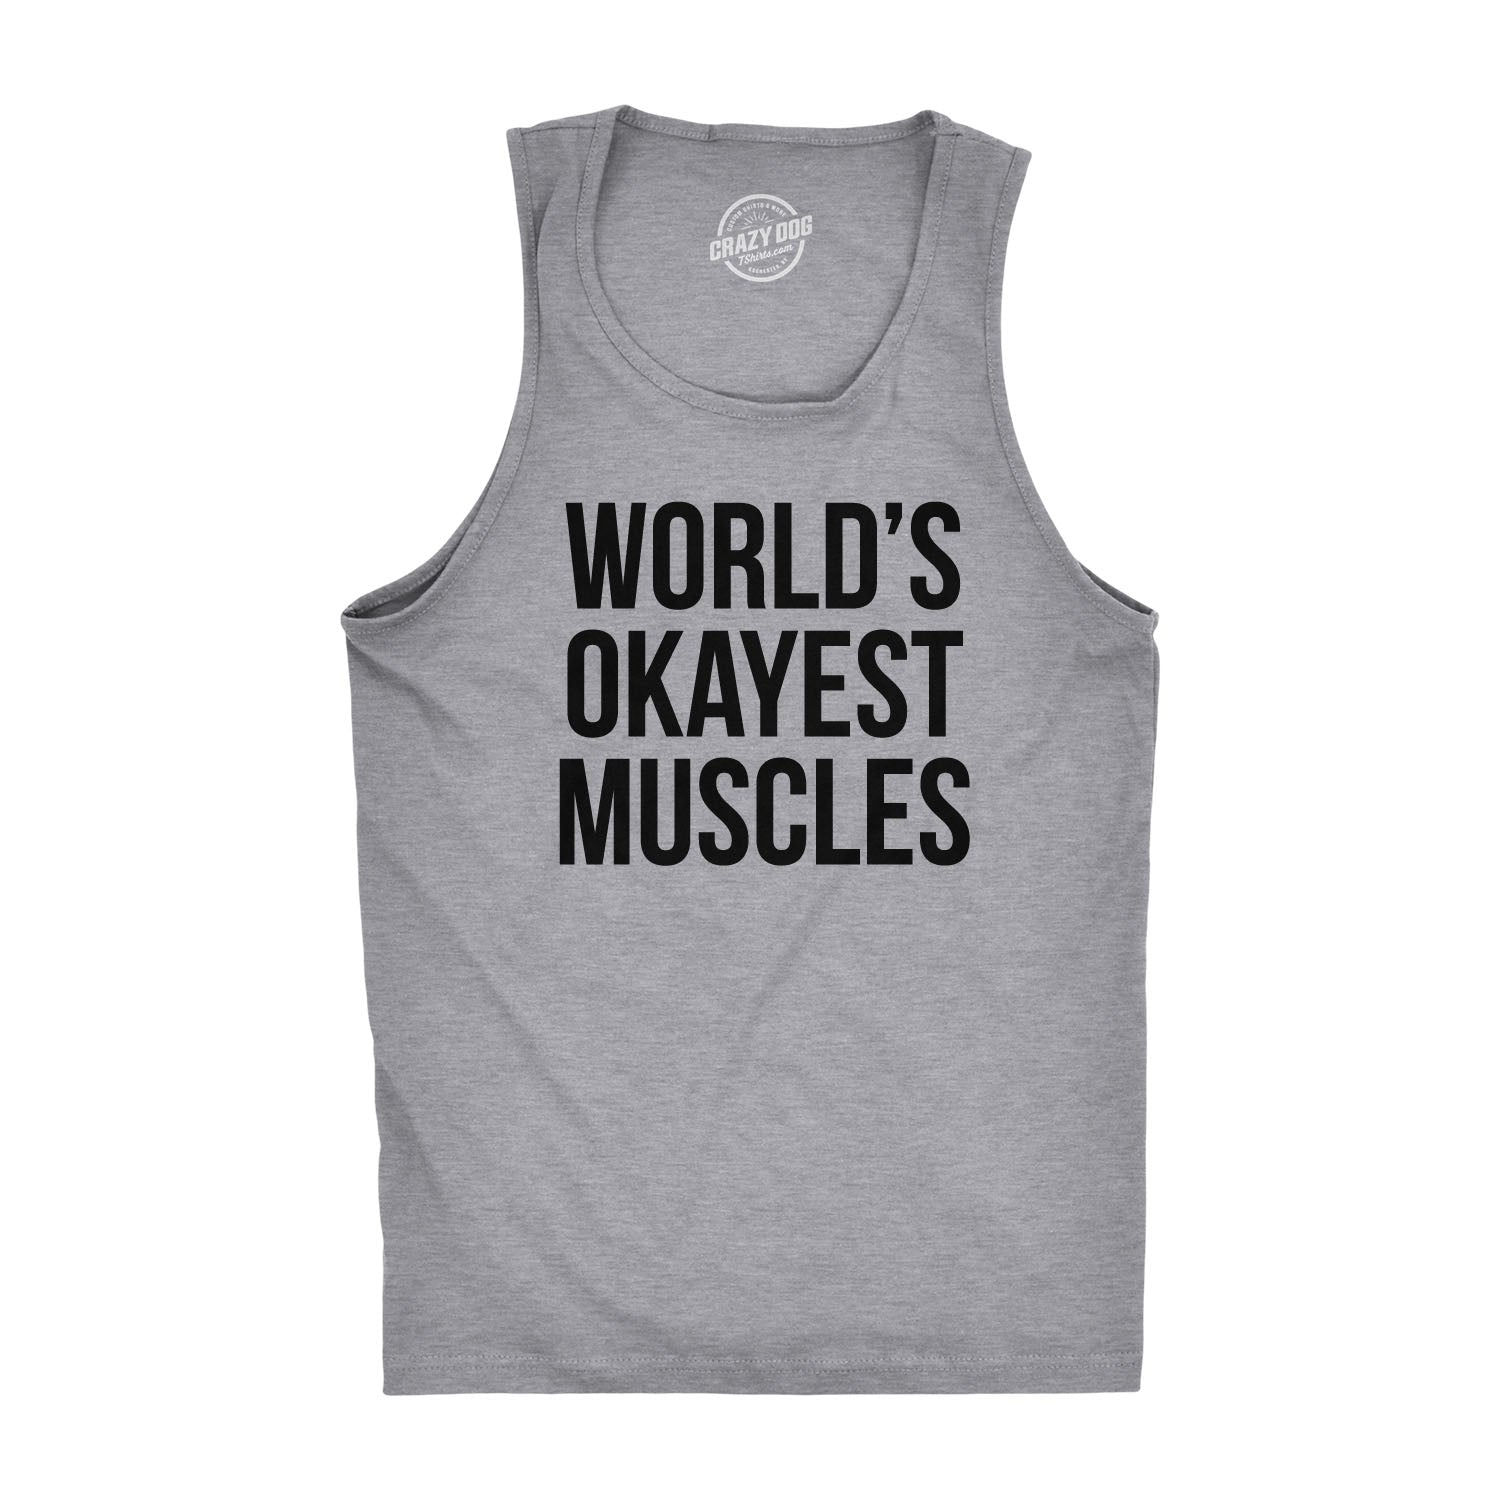 Funny Workout Shirt, Cute Gym Shirt, Workout Tee, Funny Workout Tshirt,  Workout Clothes, Workout Shirts for Women, Workout Clothing, Gym Tee -   Canada